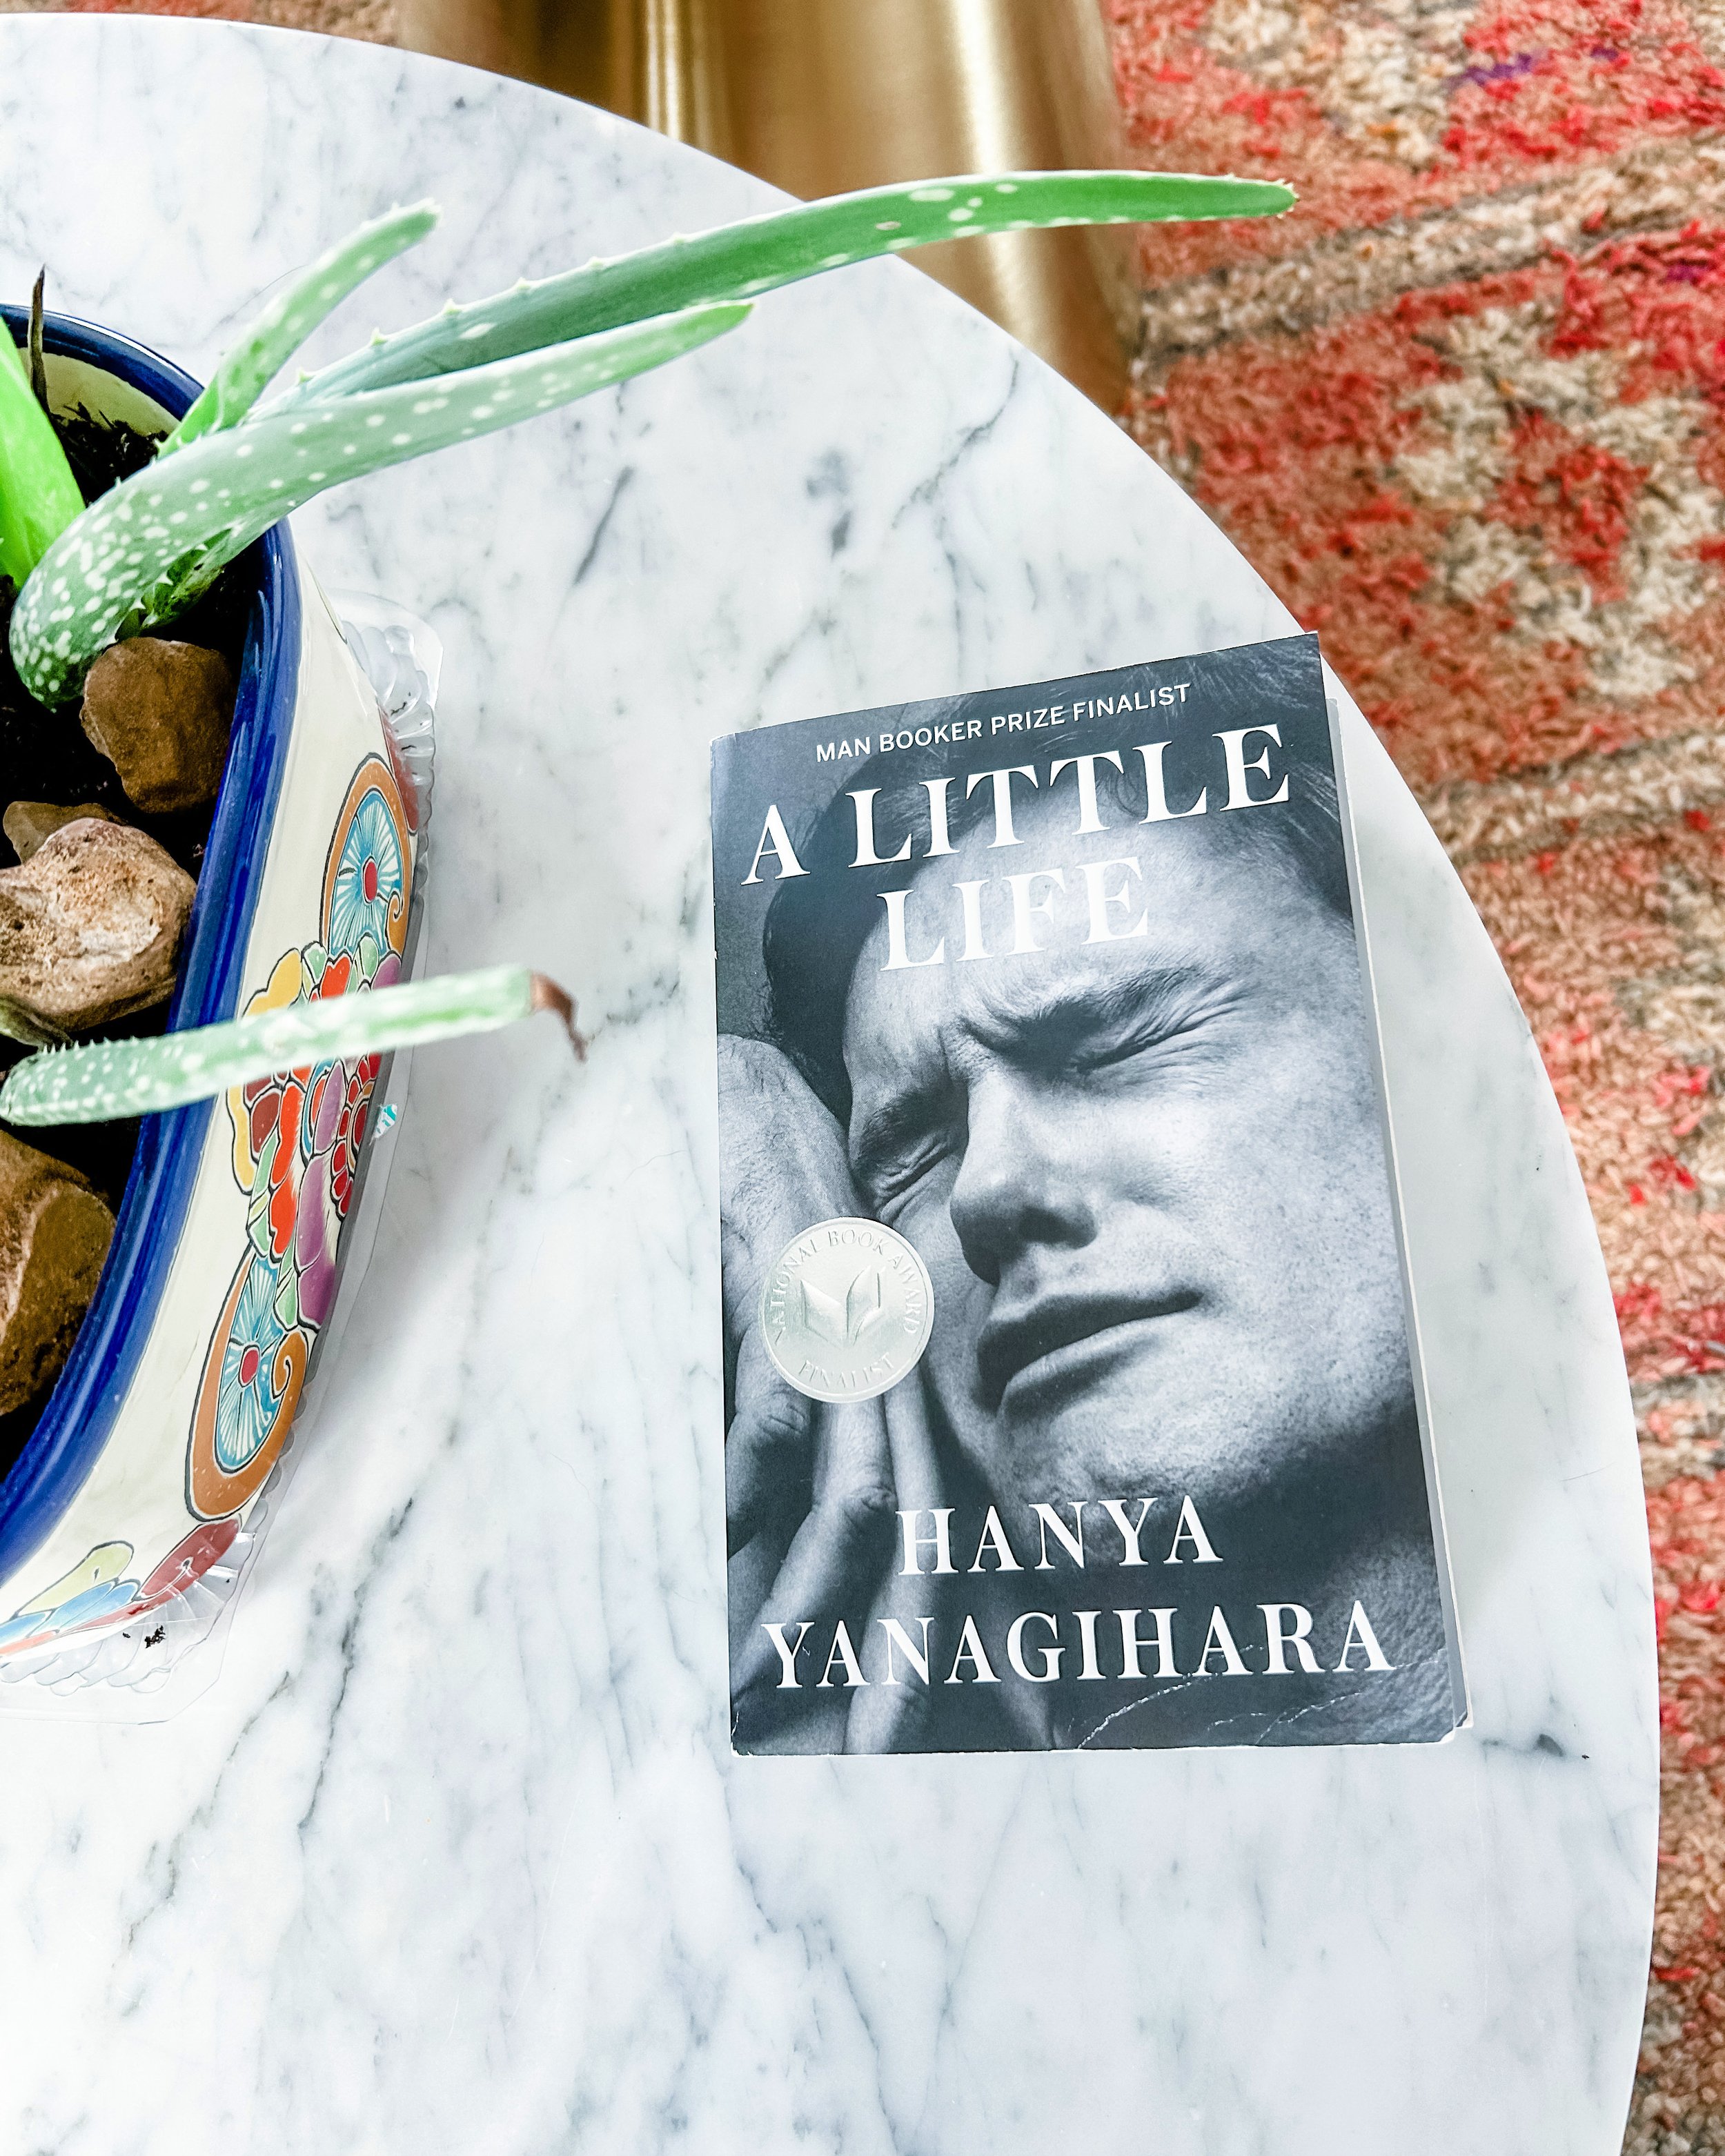 Book Review: A Little Life. “A Little Life” by Hanya Yanagihara is